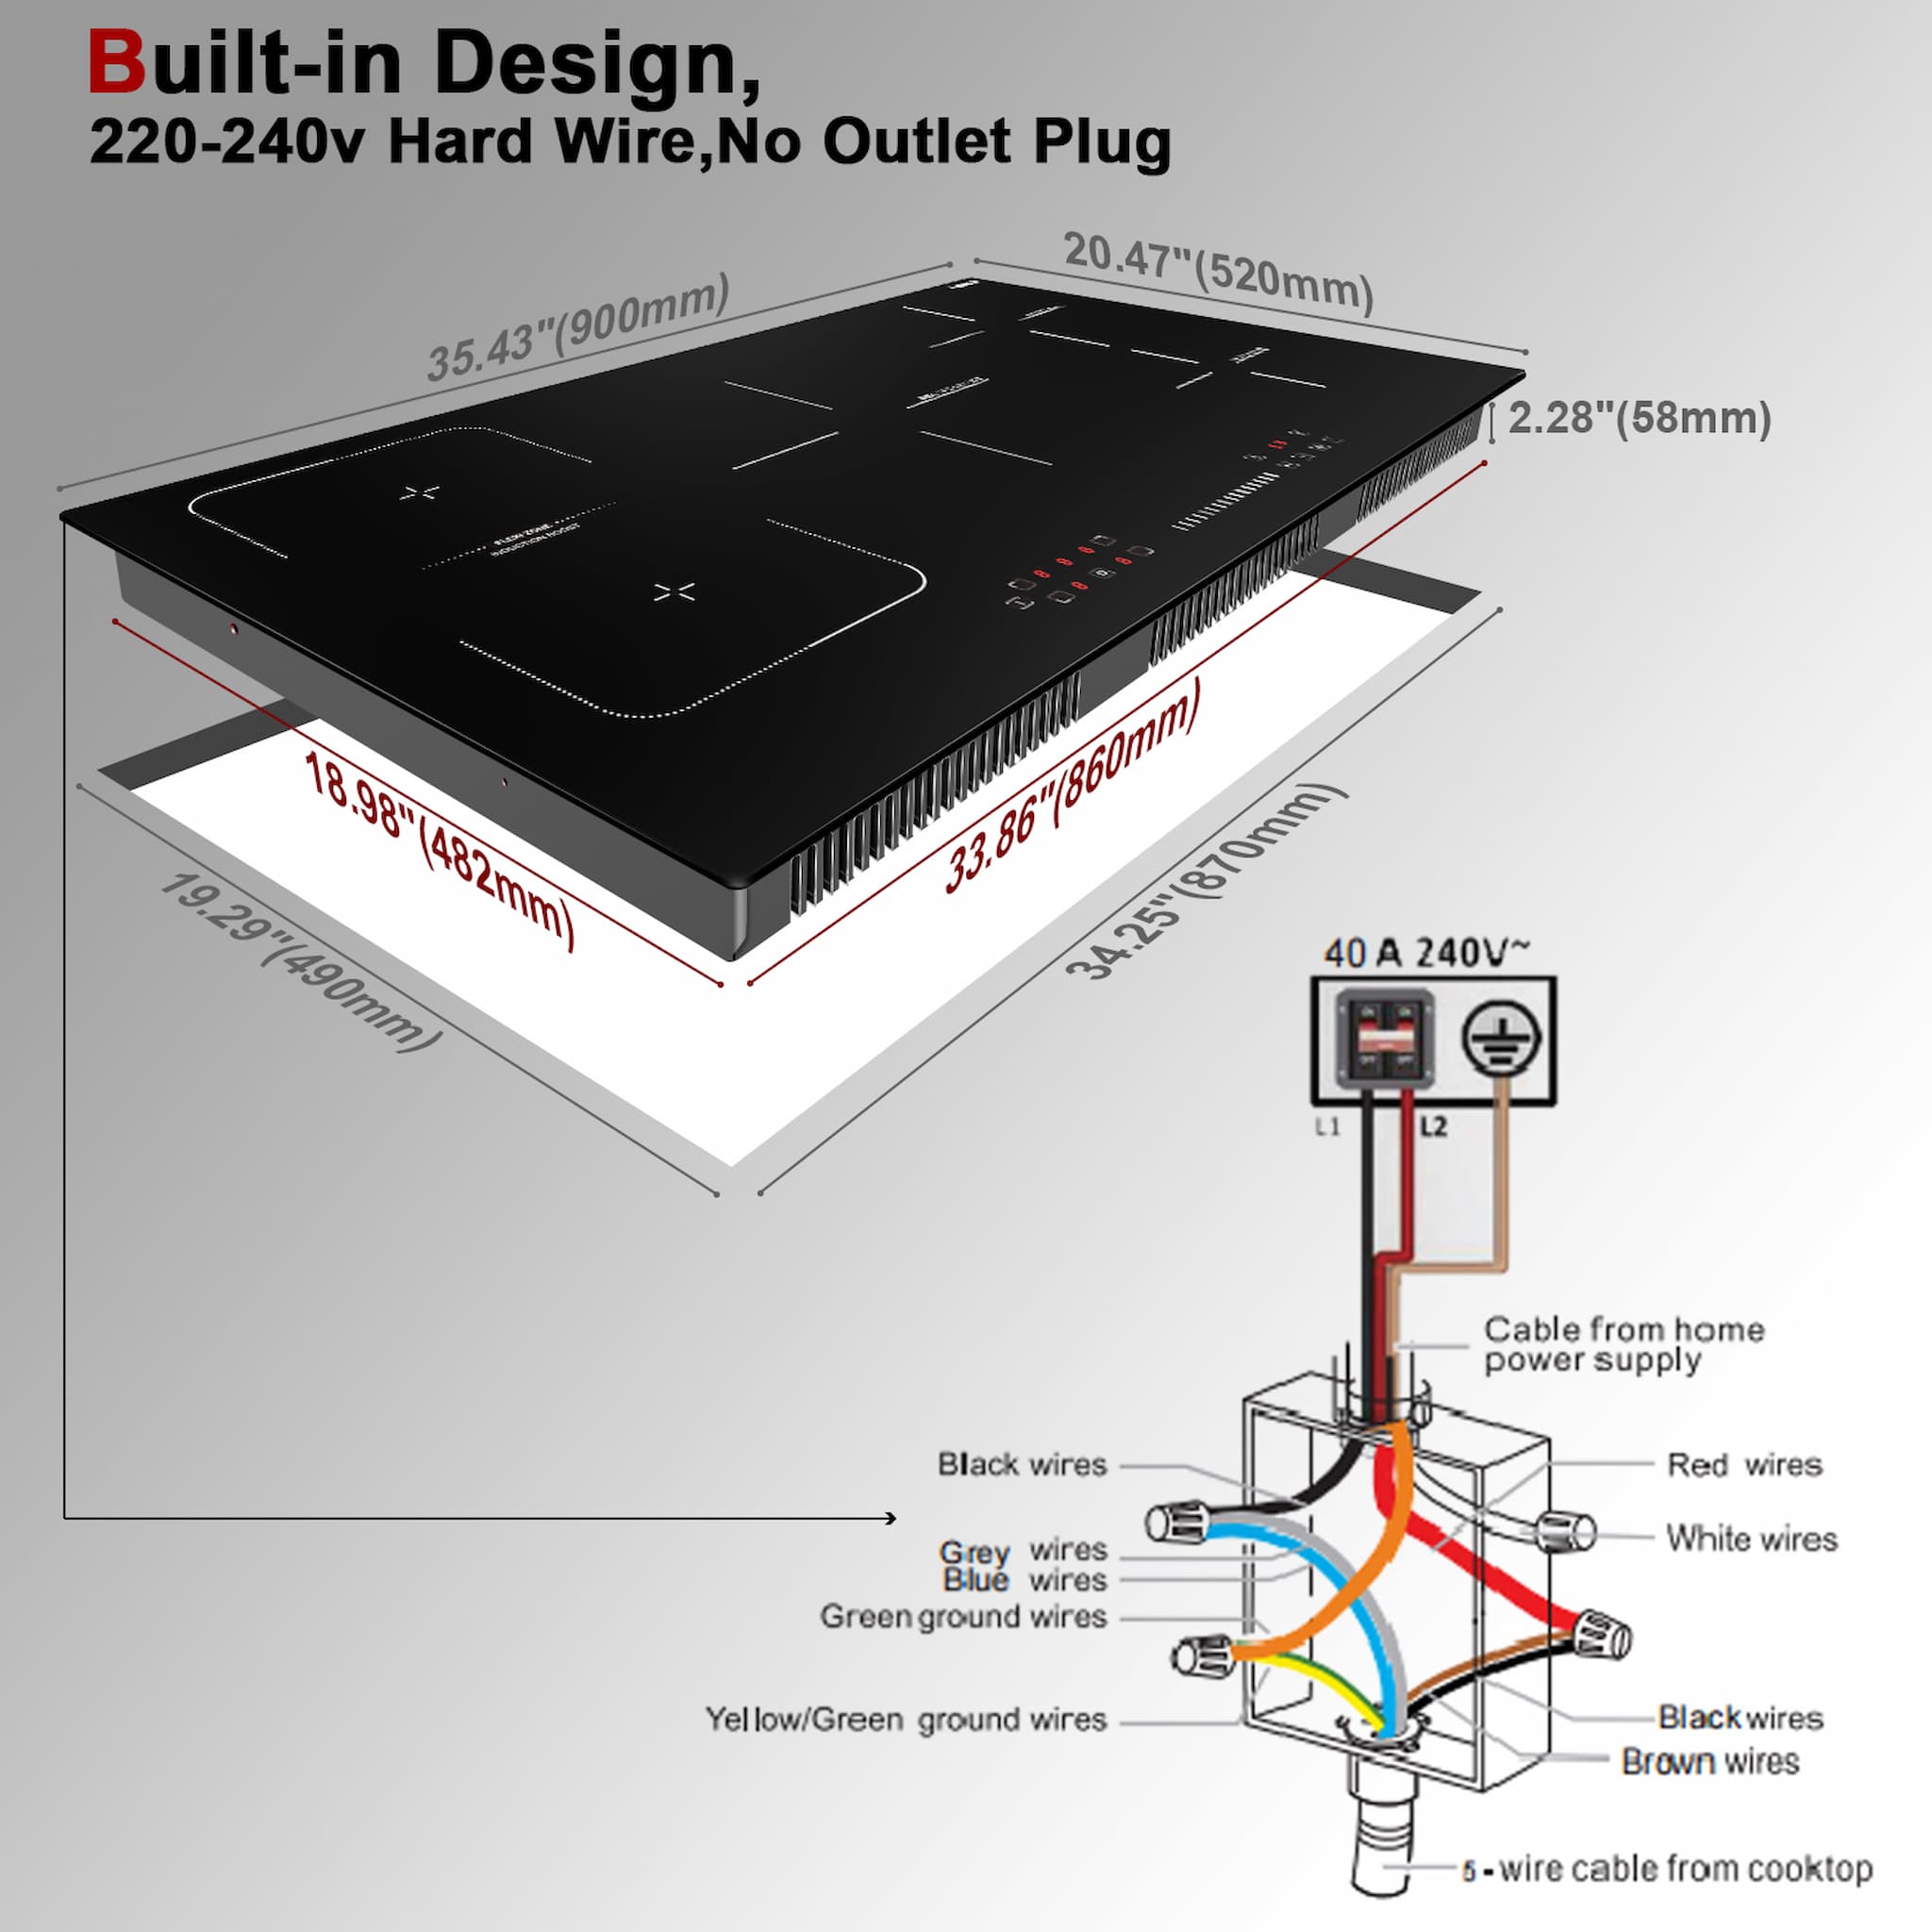 Tips: 1. 4 burner induction cooktops do not have plugs and require wiring by a properly qualified person. 2. Built-in induction cooker 220-240V hardwired, American homes are 110V, according to the wiring diagram we provide, you can solve this problem easily. 3. Please install it according to the product manual.